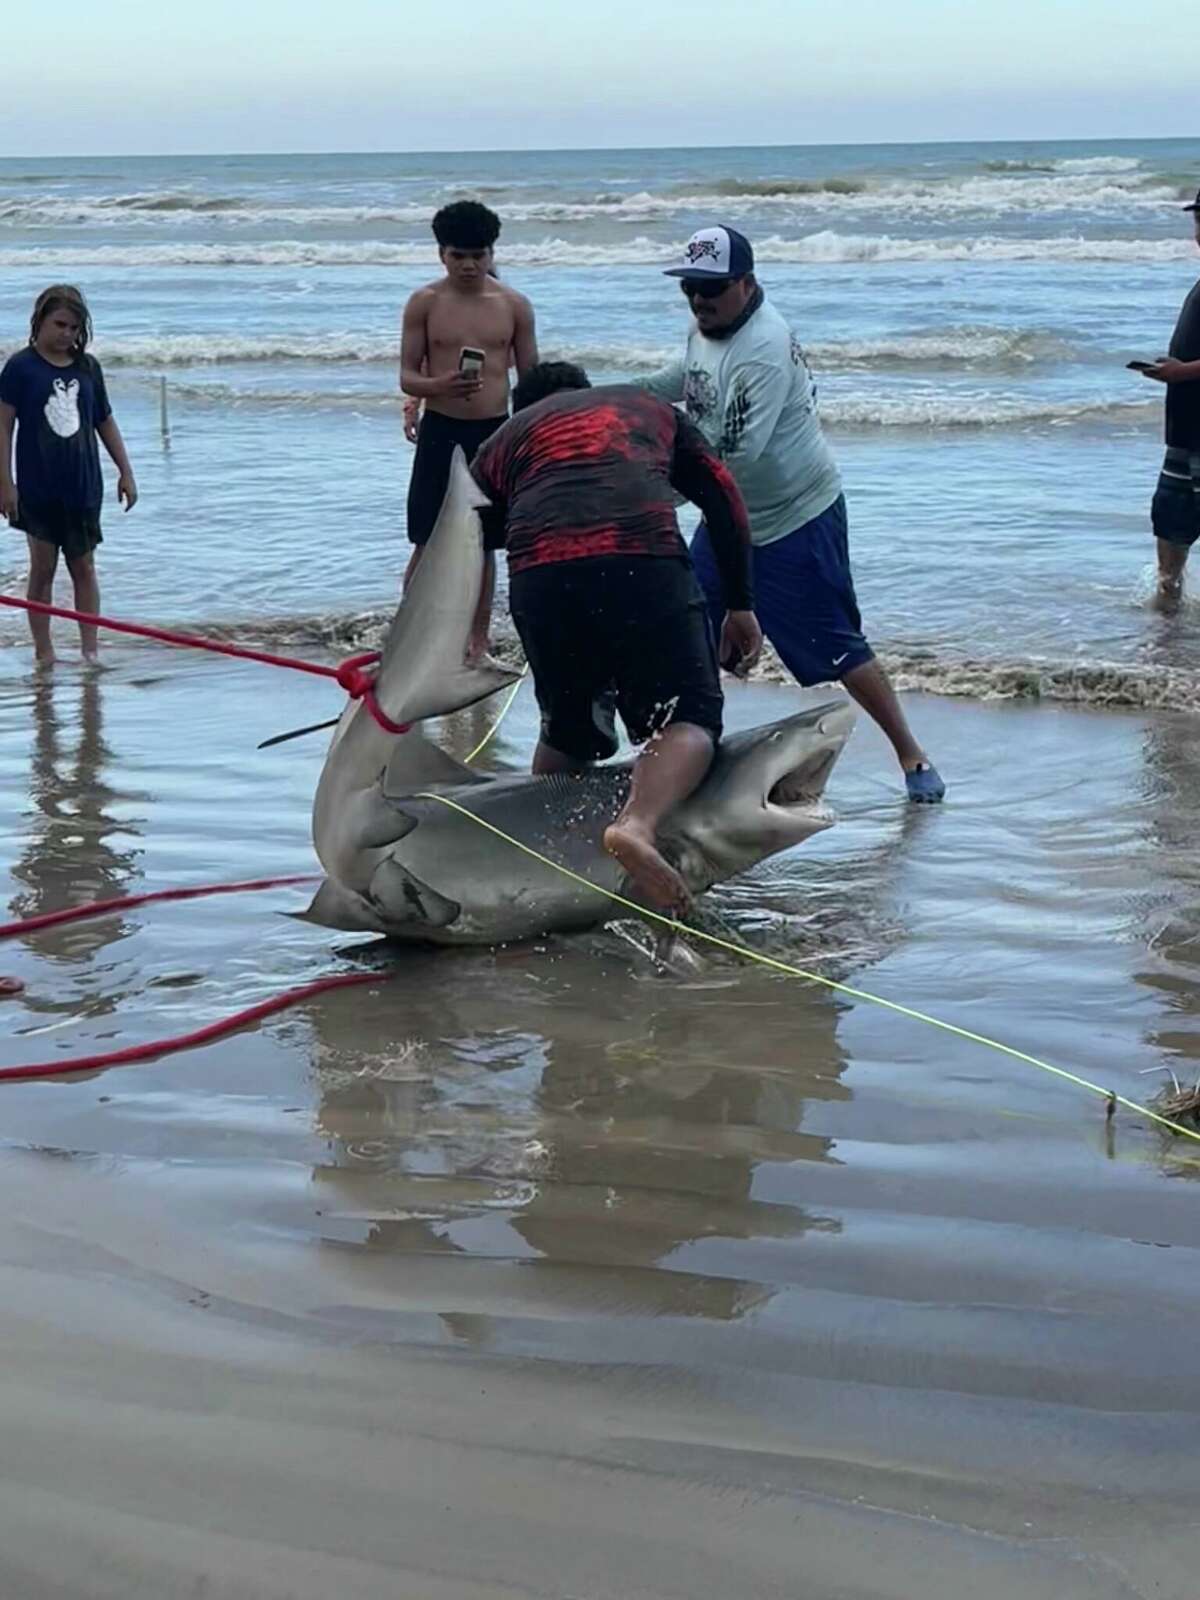 Beachgoer Stevie Jo Tipton captured anglers who reeled in a large shark only 100 yards away from the shoreline at Surfside Beach on June 4. 